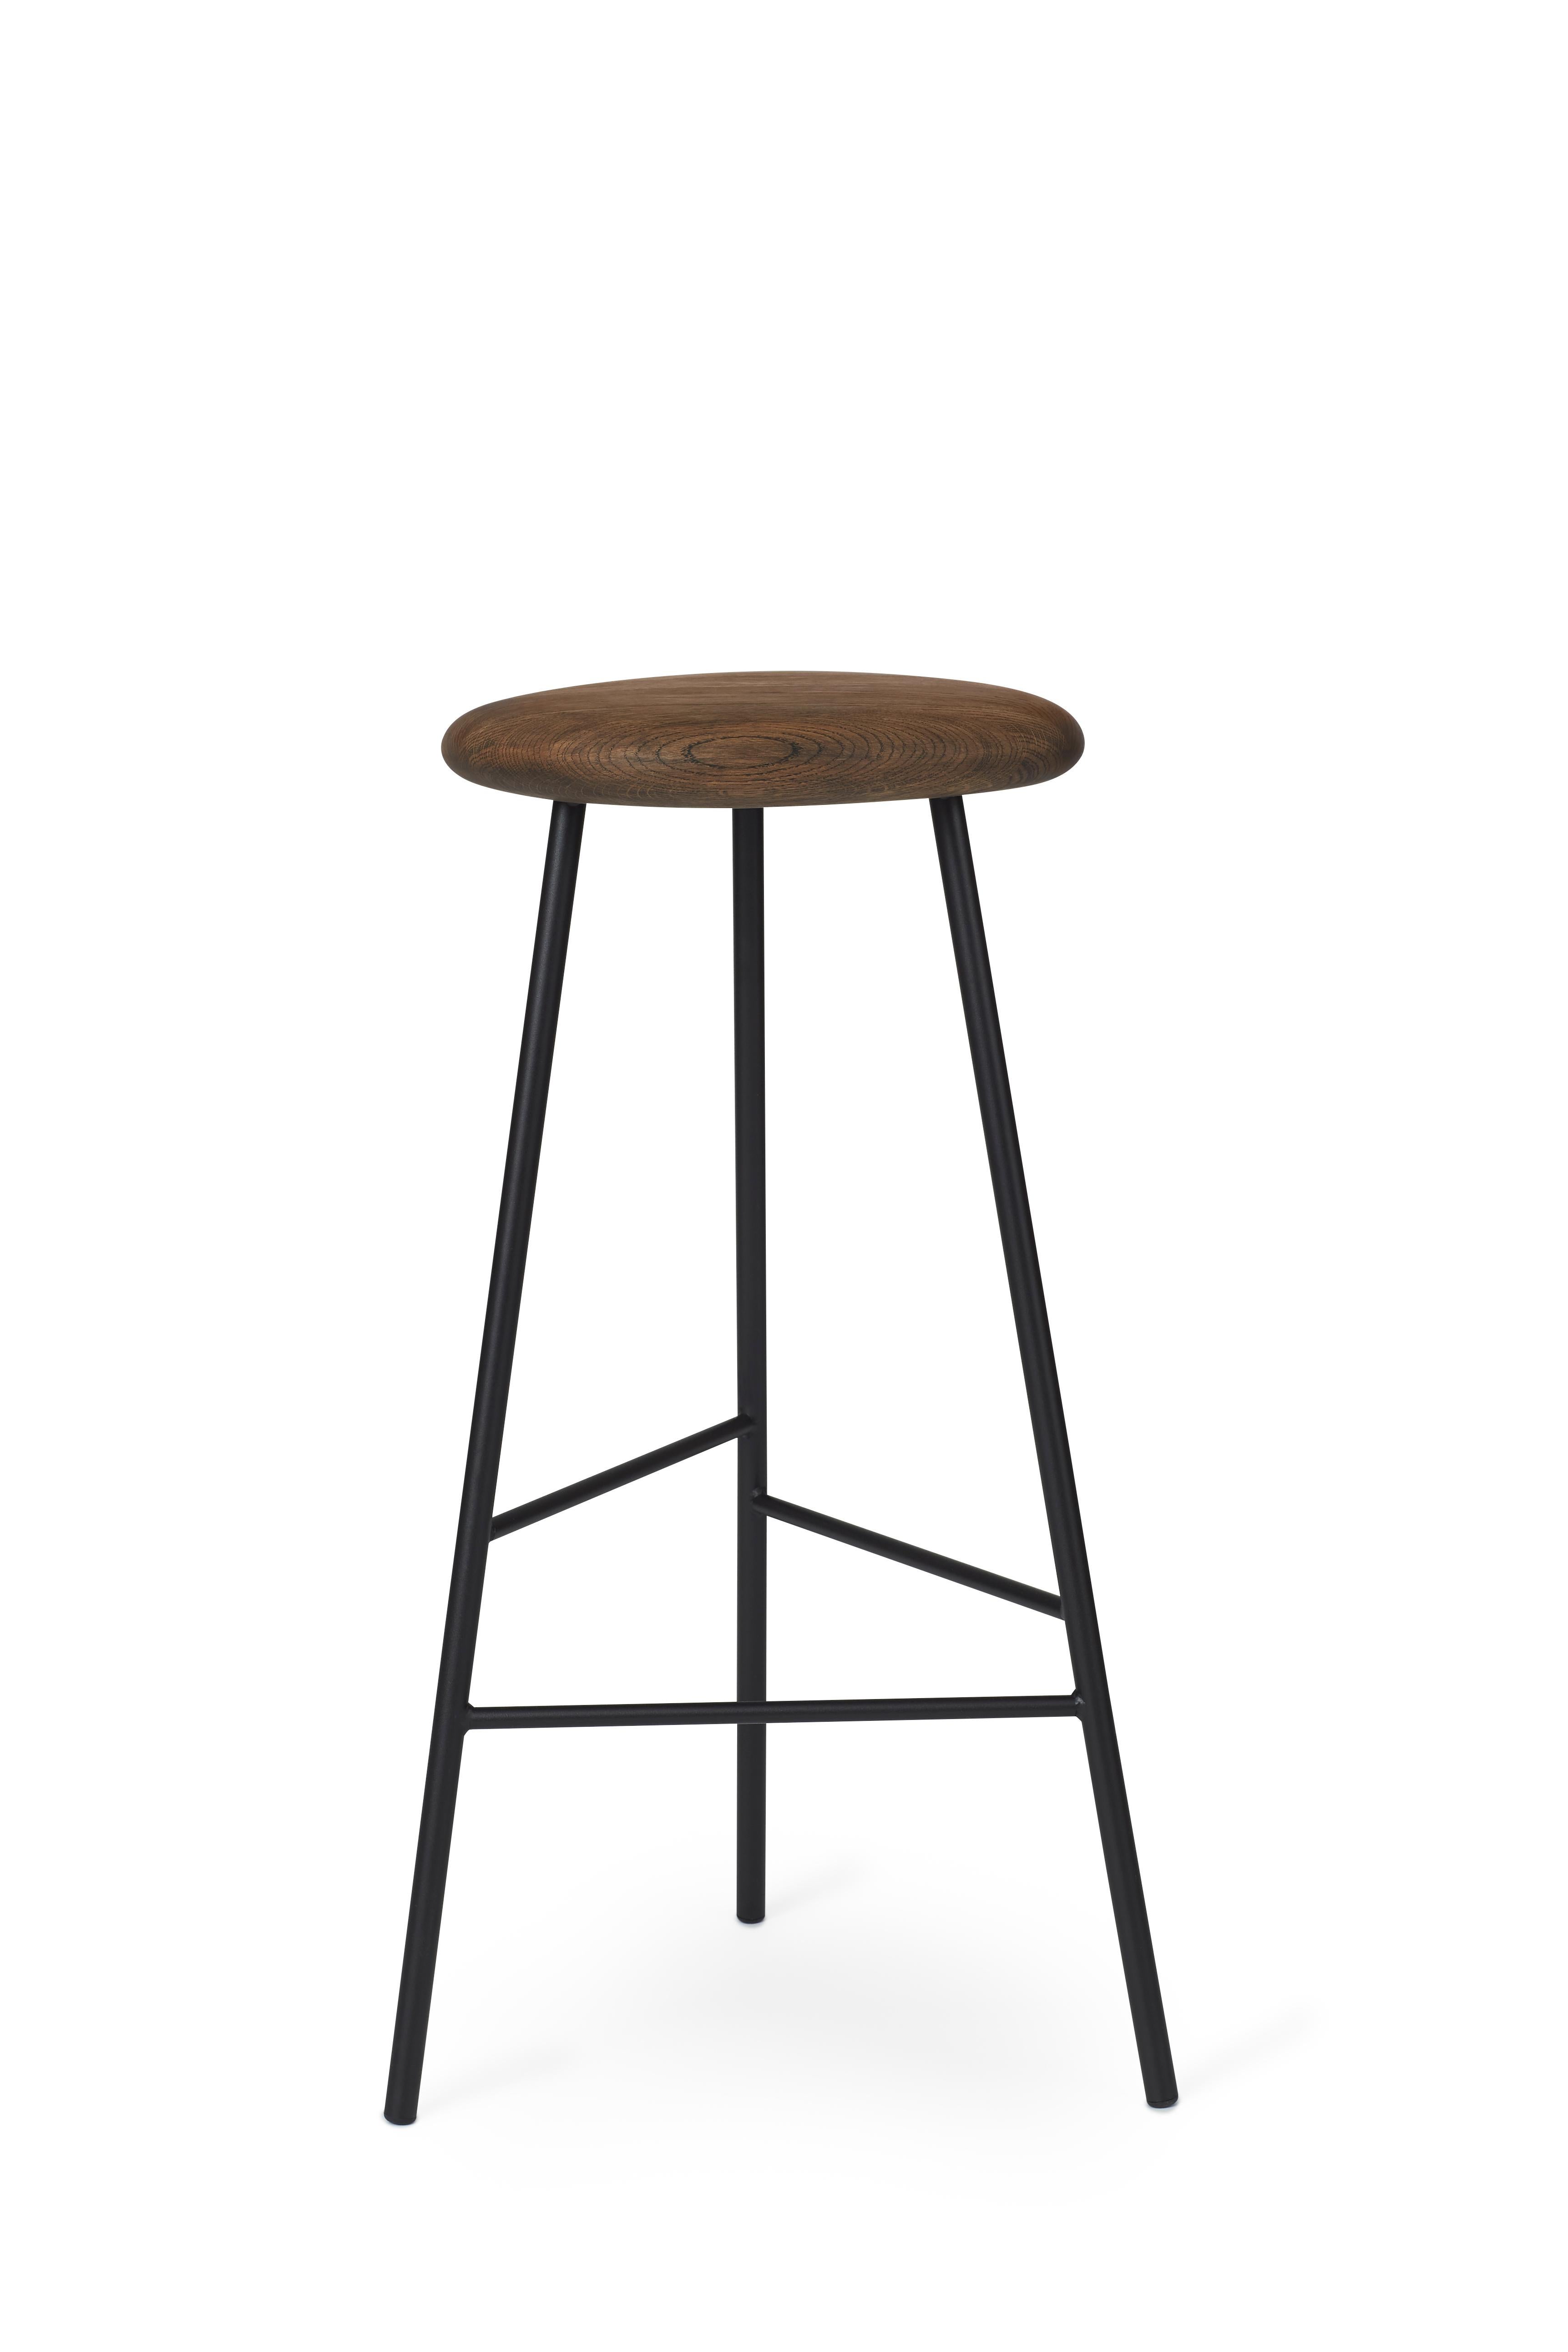 For Sale: Black (Smoked Oak/Black Noir) Pebble Bar Stool, by Welling / Ludvik from Warm Nordic